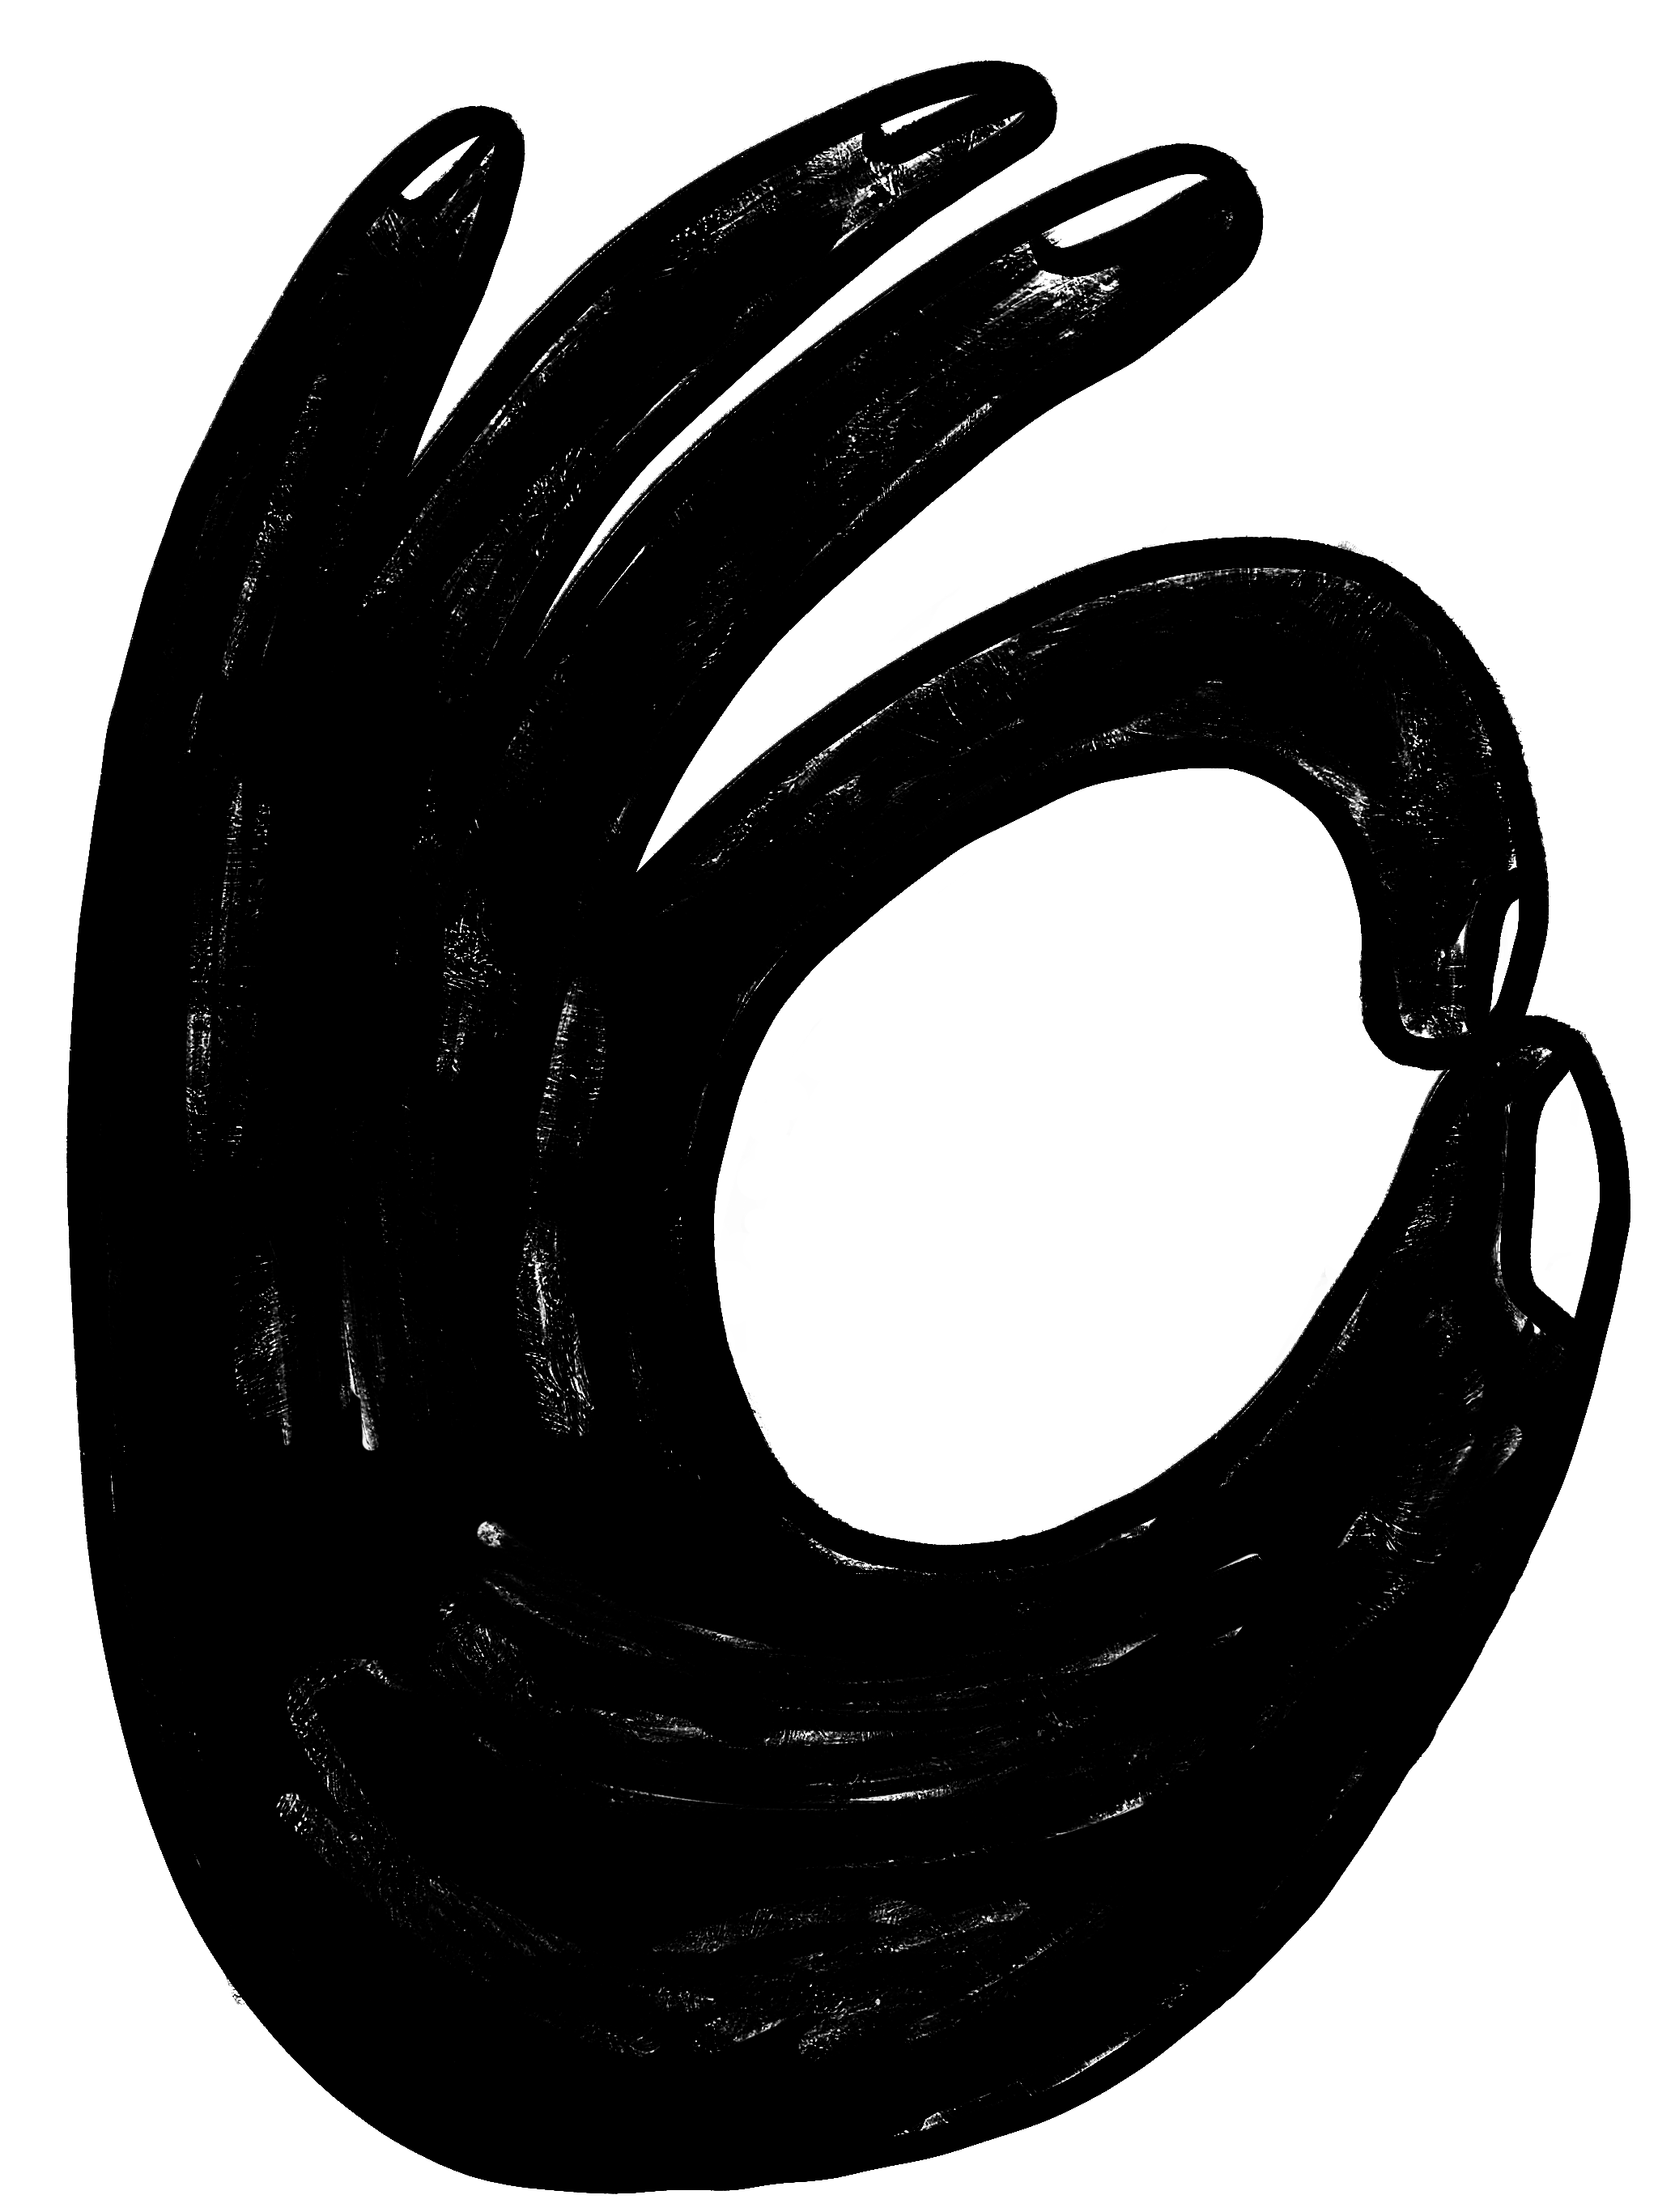 A textured illustration of a hand making the 'OK' symbol in black on white